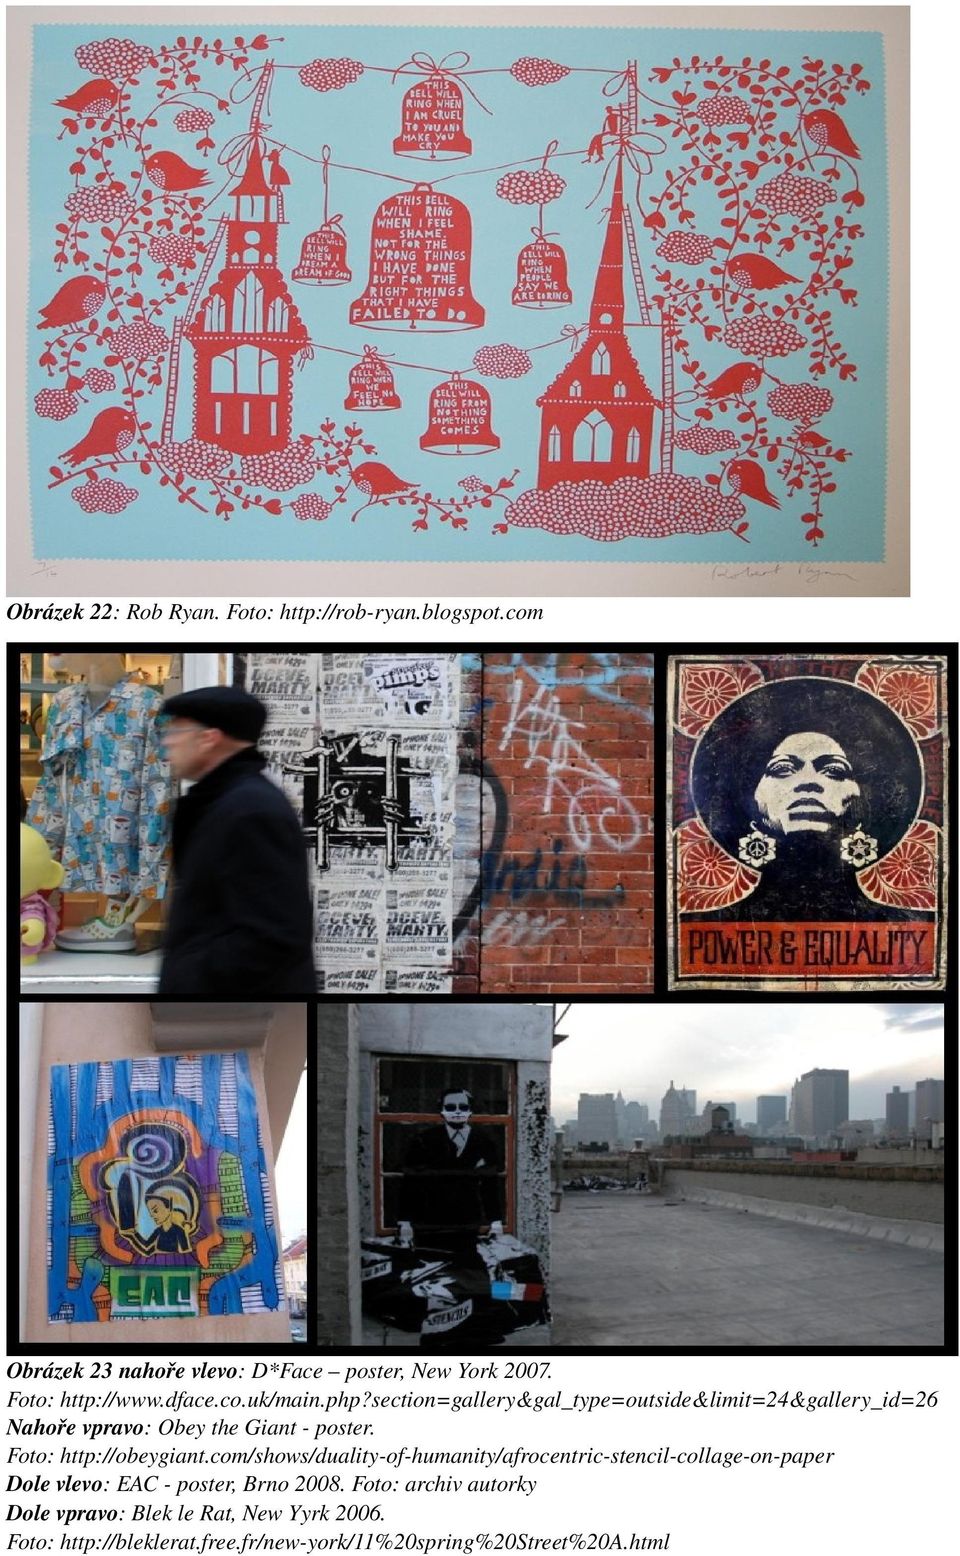 section=gallery&gal_type=outside&limit=24&gallery_id=26 Nahoře vpravo: Obey the Giant poster. Foto: http://obeygiant.